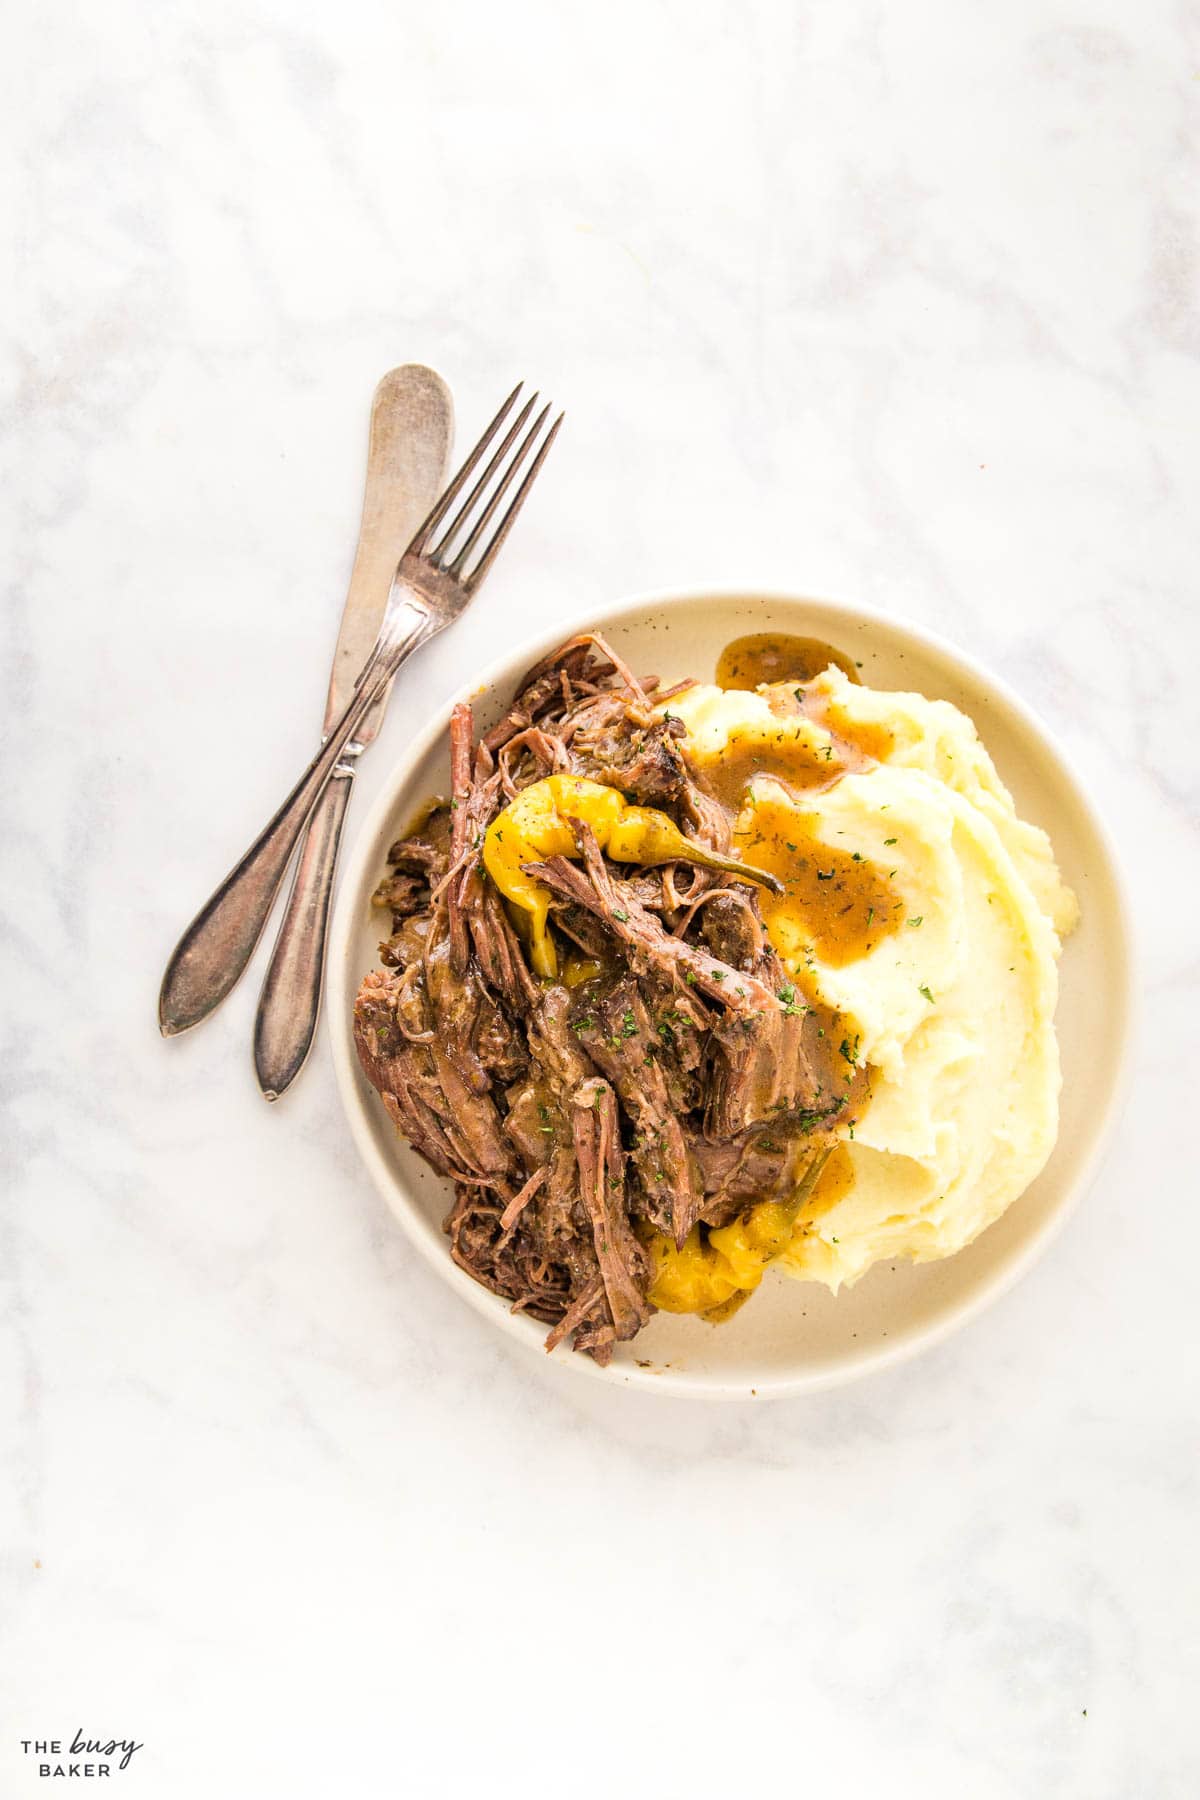 Mississippi Pot Roast with mashed potatoes and gravy